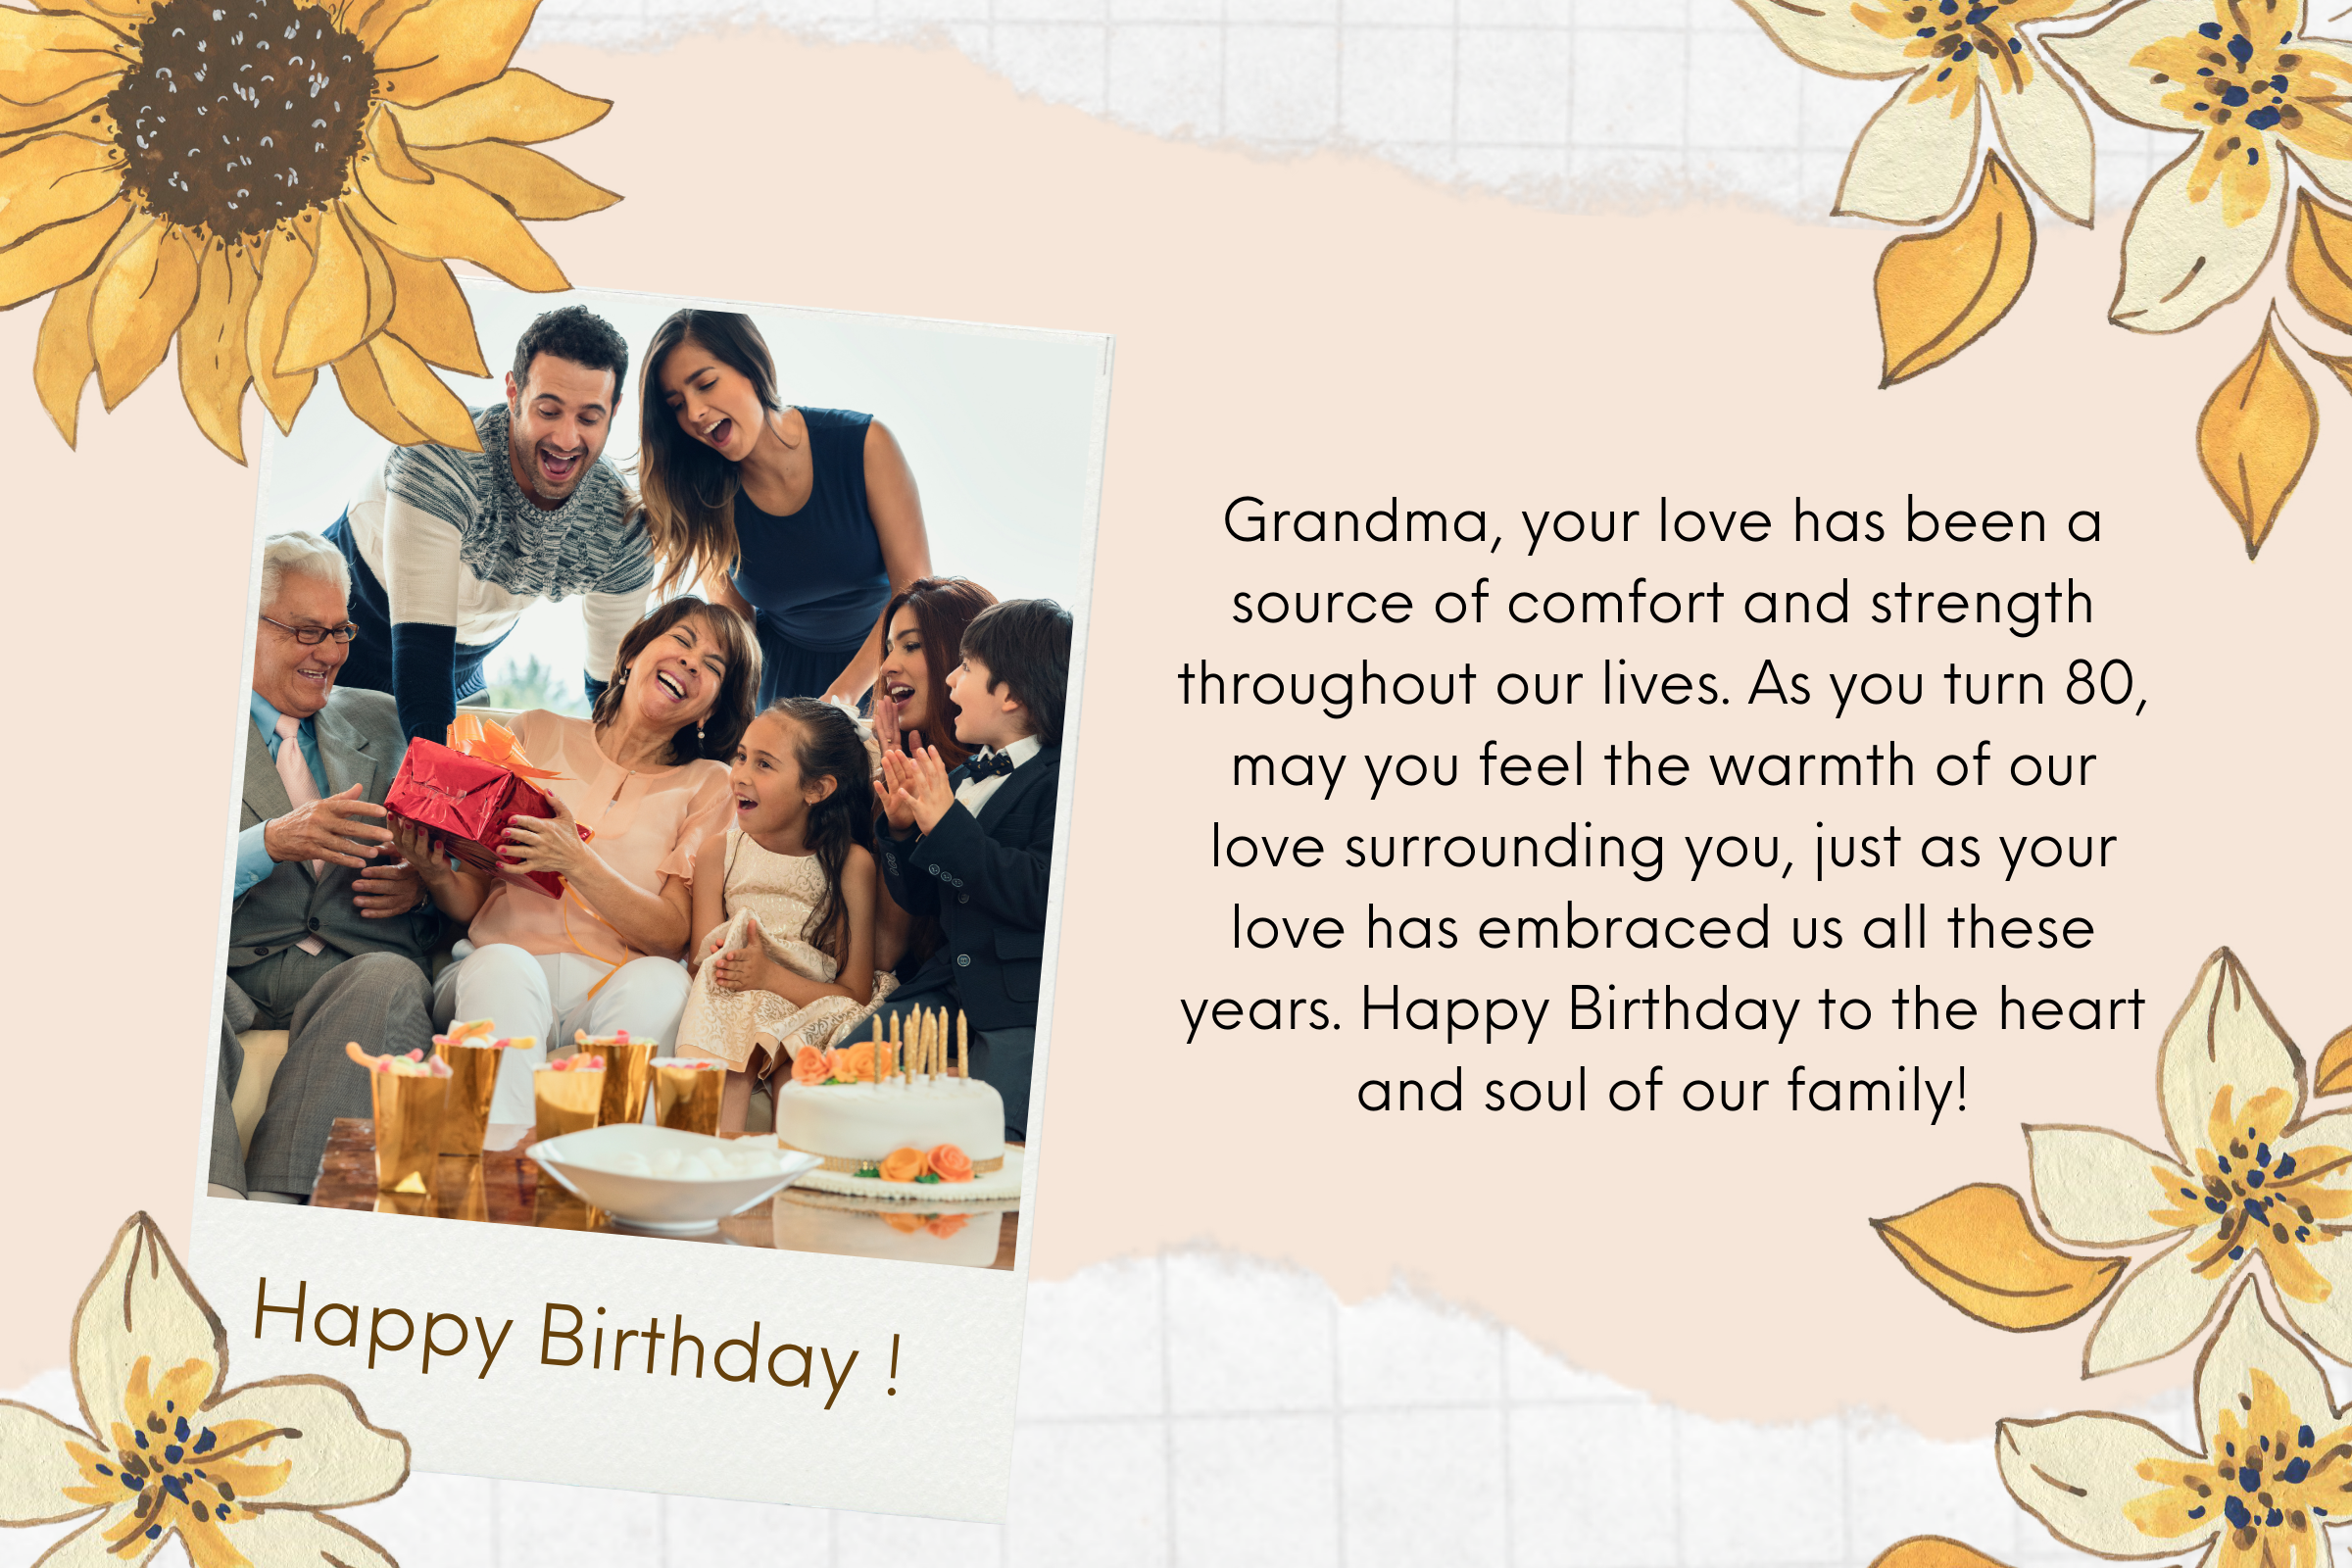 Sending you warm and happy 80th birthday wishes. May your day be as amazing as the years you've lived!